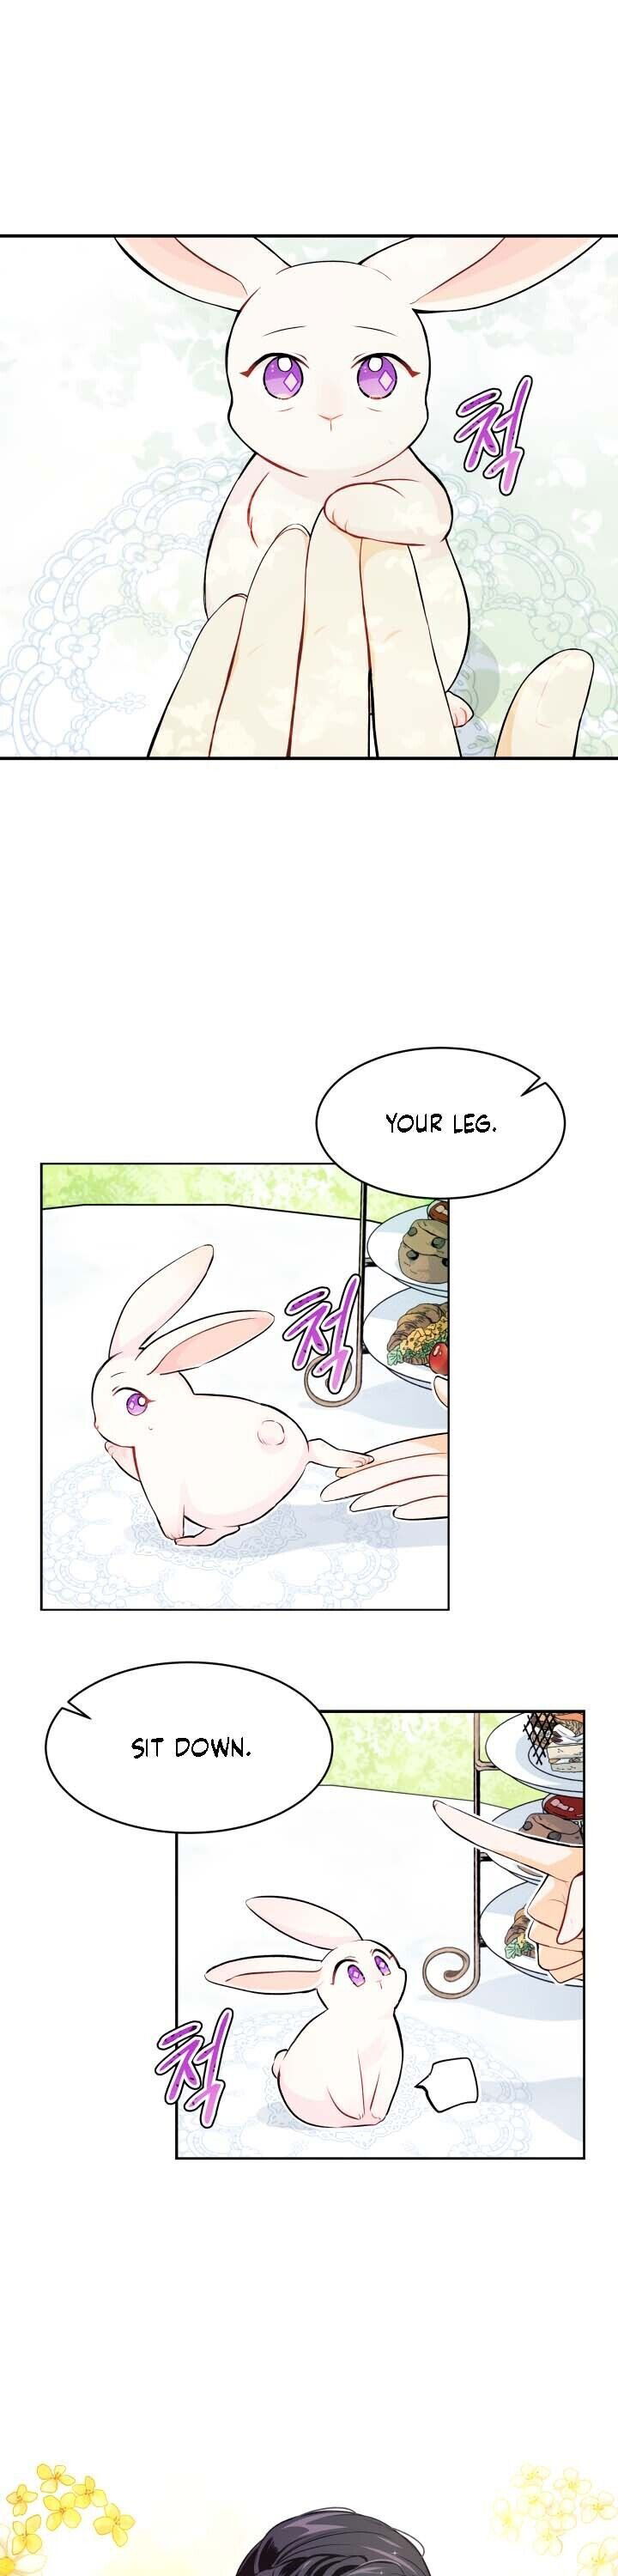 A Symbiotic Relationship Between A Rabbit And A Black Panther Chapter 5 page 6